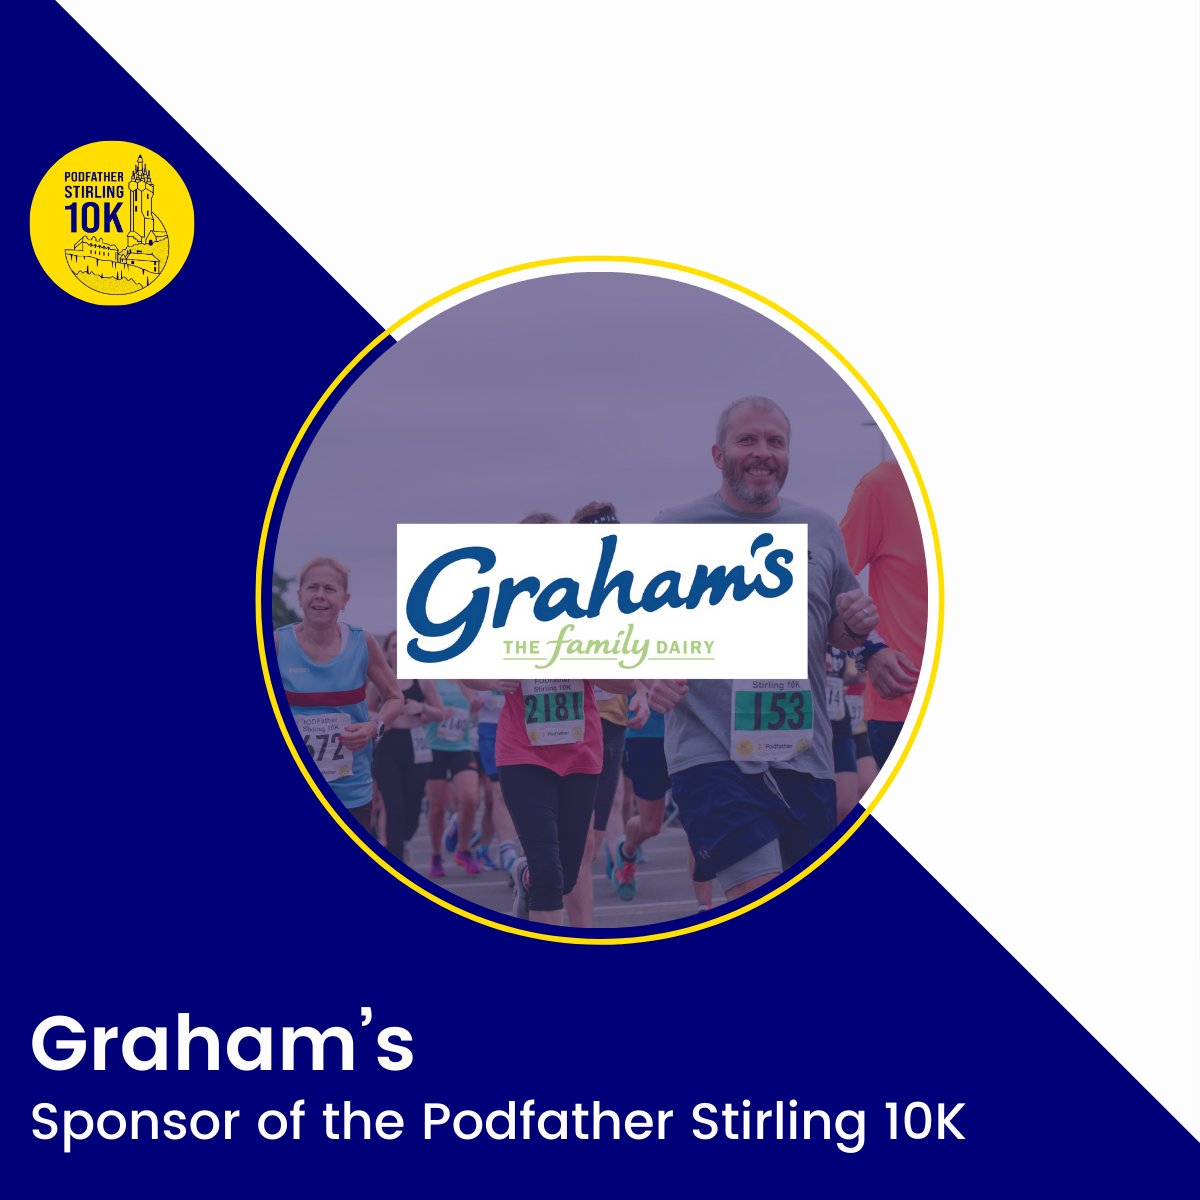 We’re proudly partnering with @GrahamsDairy, fuelling our runners with the finest dairy products after the finish line #grahamsdairy  #ukrunchat #scottishrunning #scottishrunner #scottishrunningguide #scottishathletics #scottish10k #stirling10k